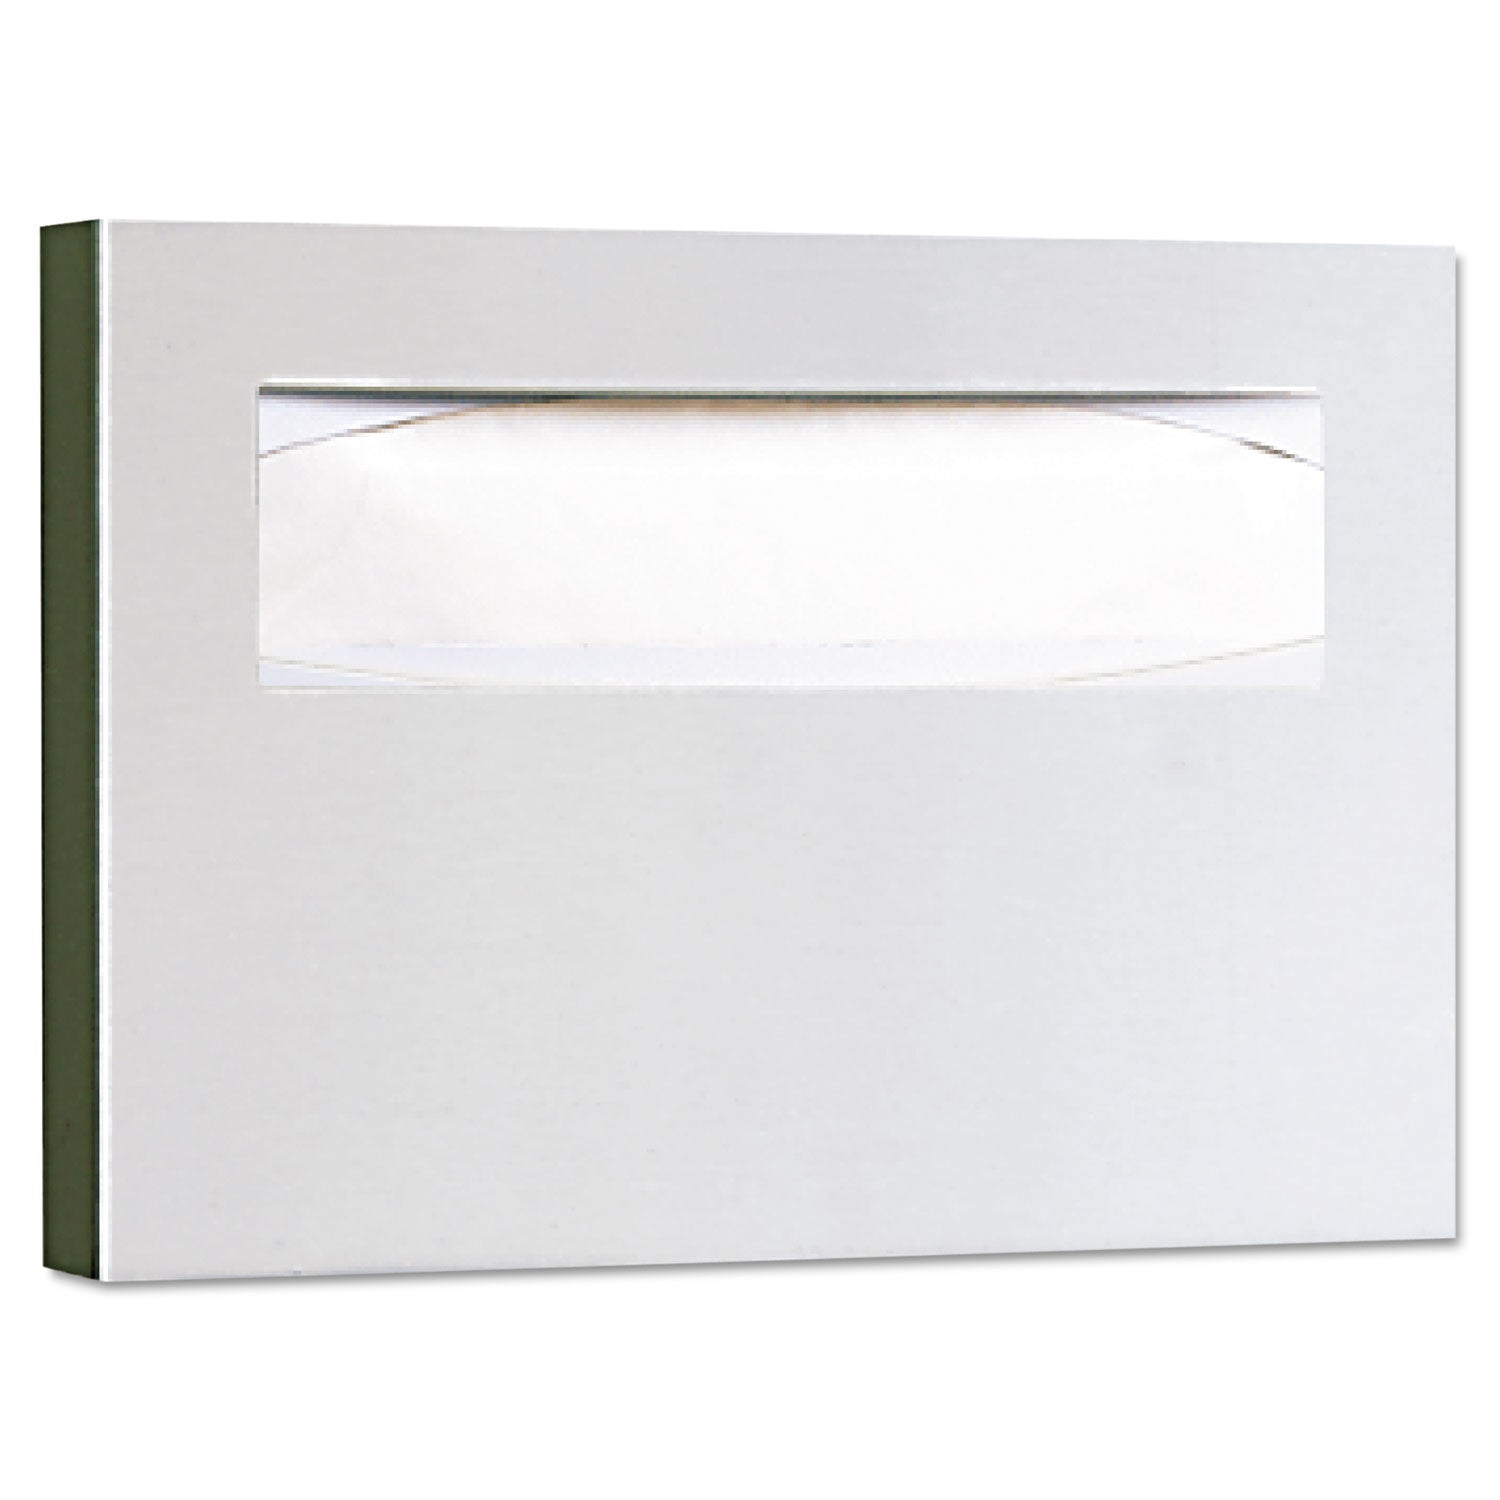 Stainless Steel Toilet Seat Cover Dispenser, ClassicSeries, 15.75 x 2 x 11, Satin Finish - 